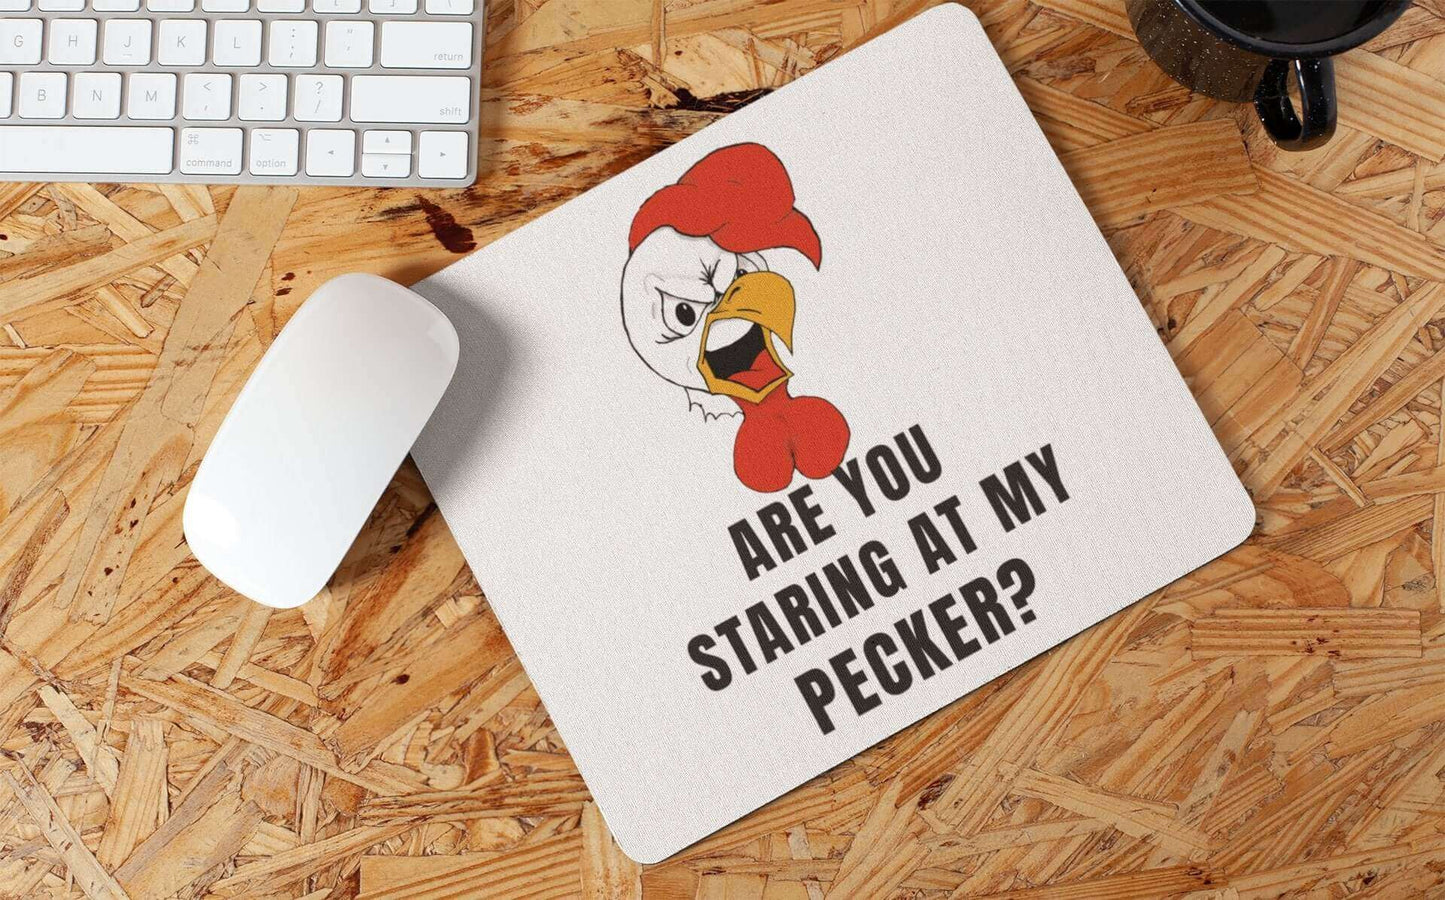 Are you staring at my PECKER ? - Mouse pad - Horrible Designs